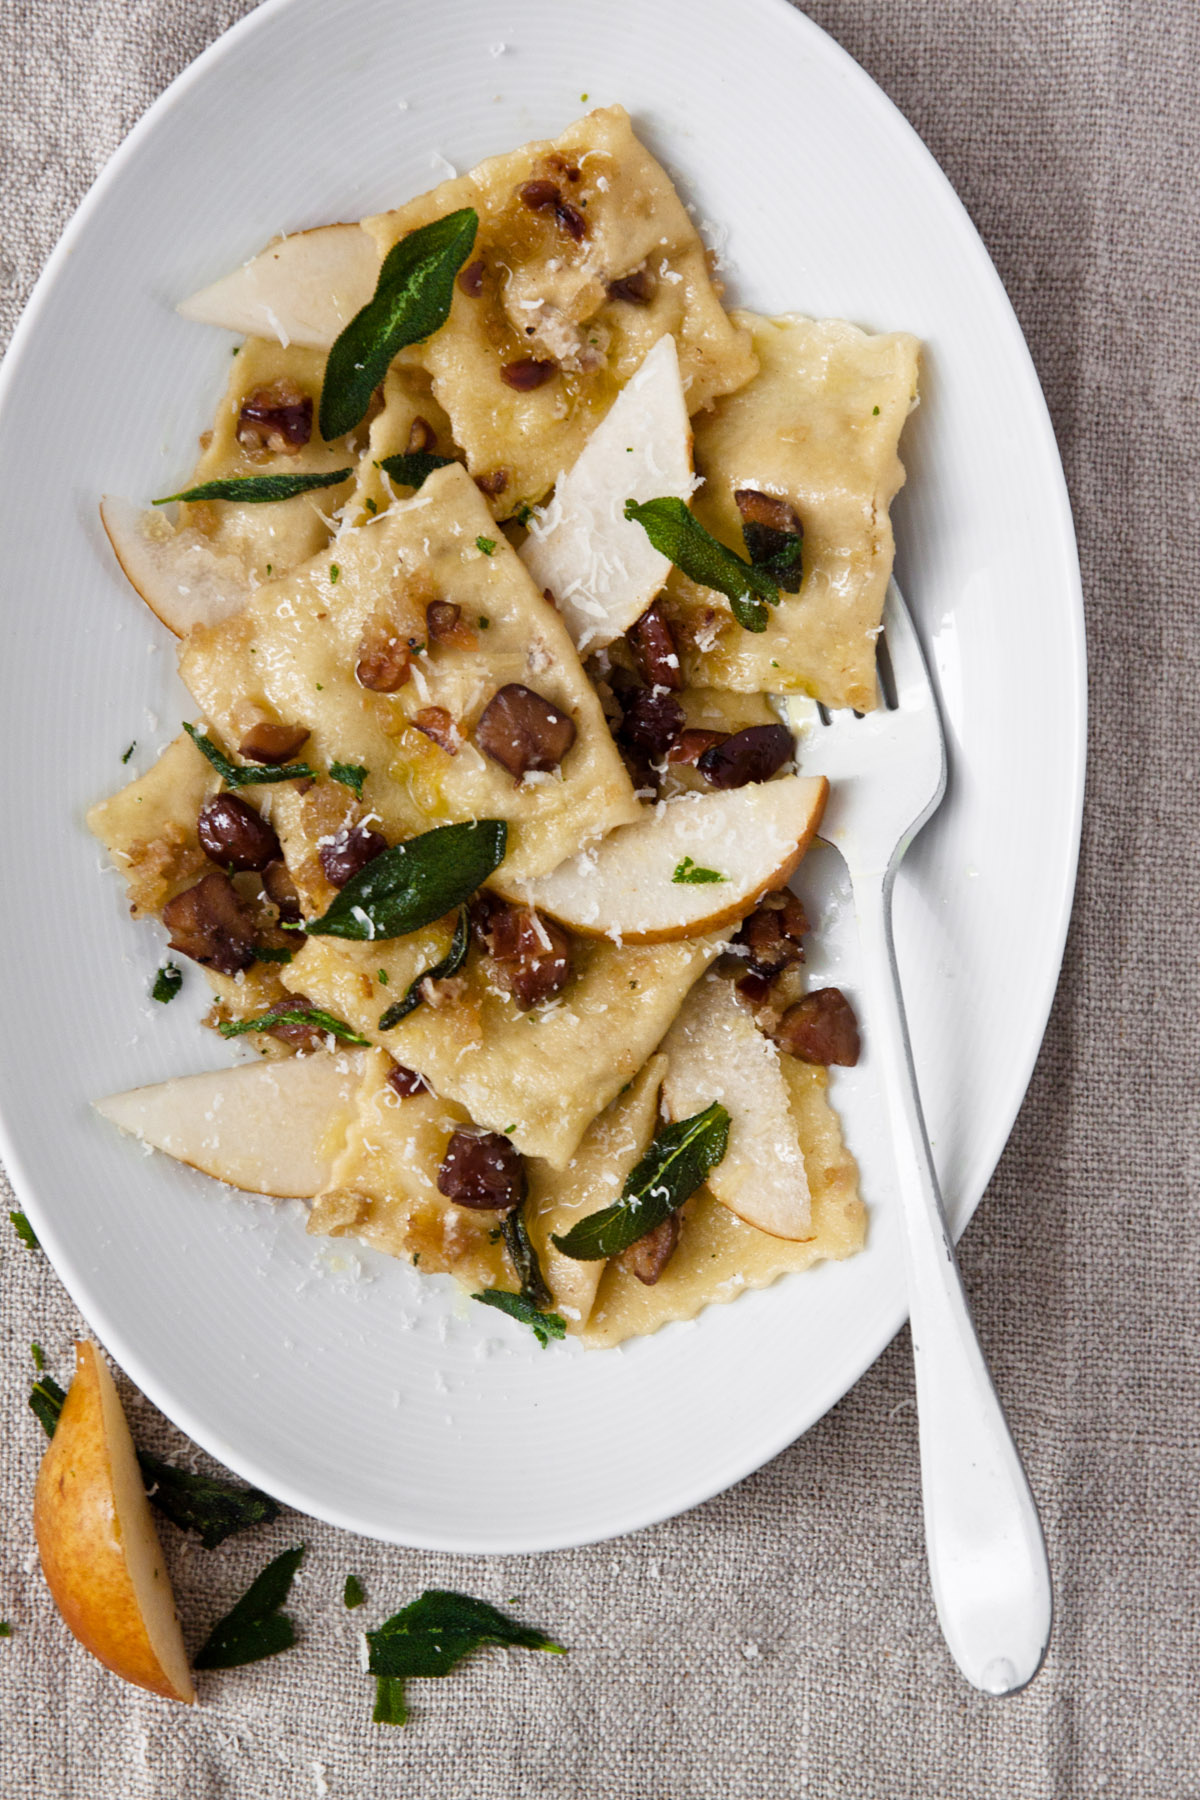 Pear and Chestnut Ravioli with Fried Sage